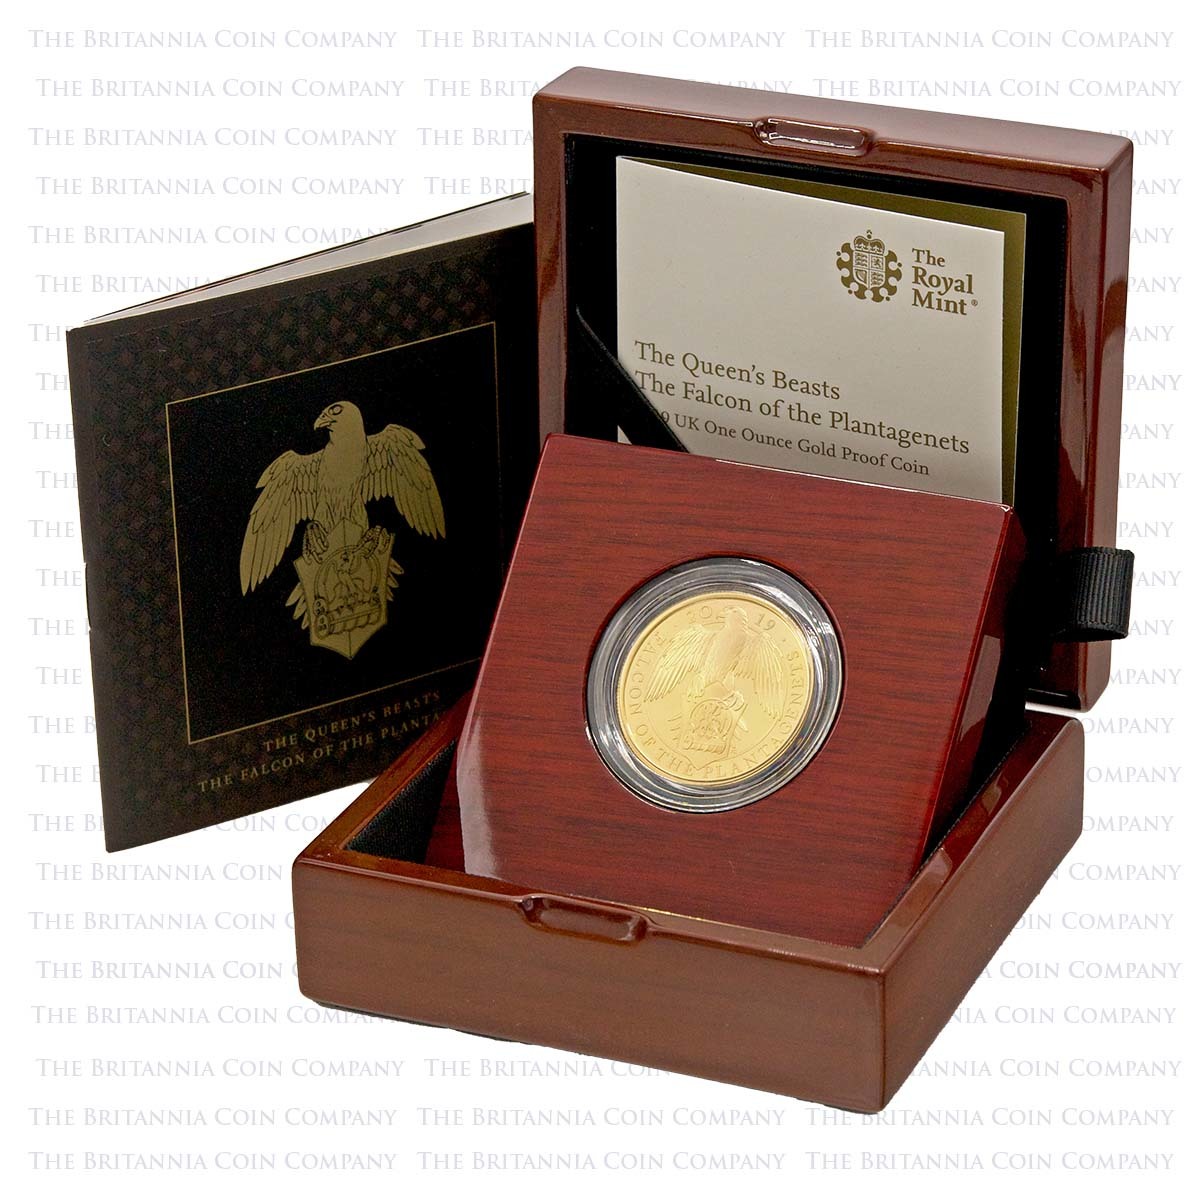 2019 Queen's Beasts Falcon of the Plantagenets 1 Ounce Gold Proof Boxed